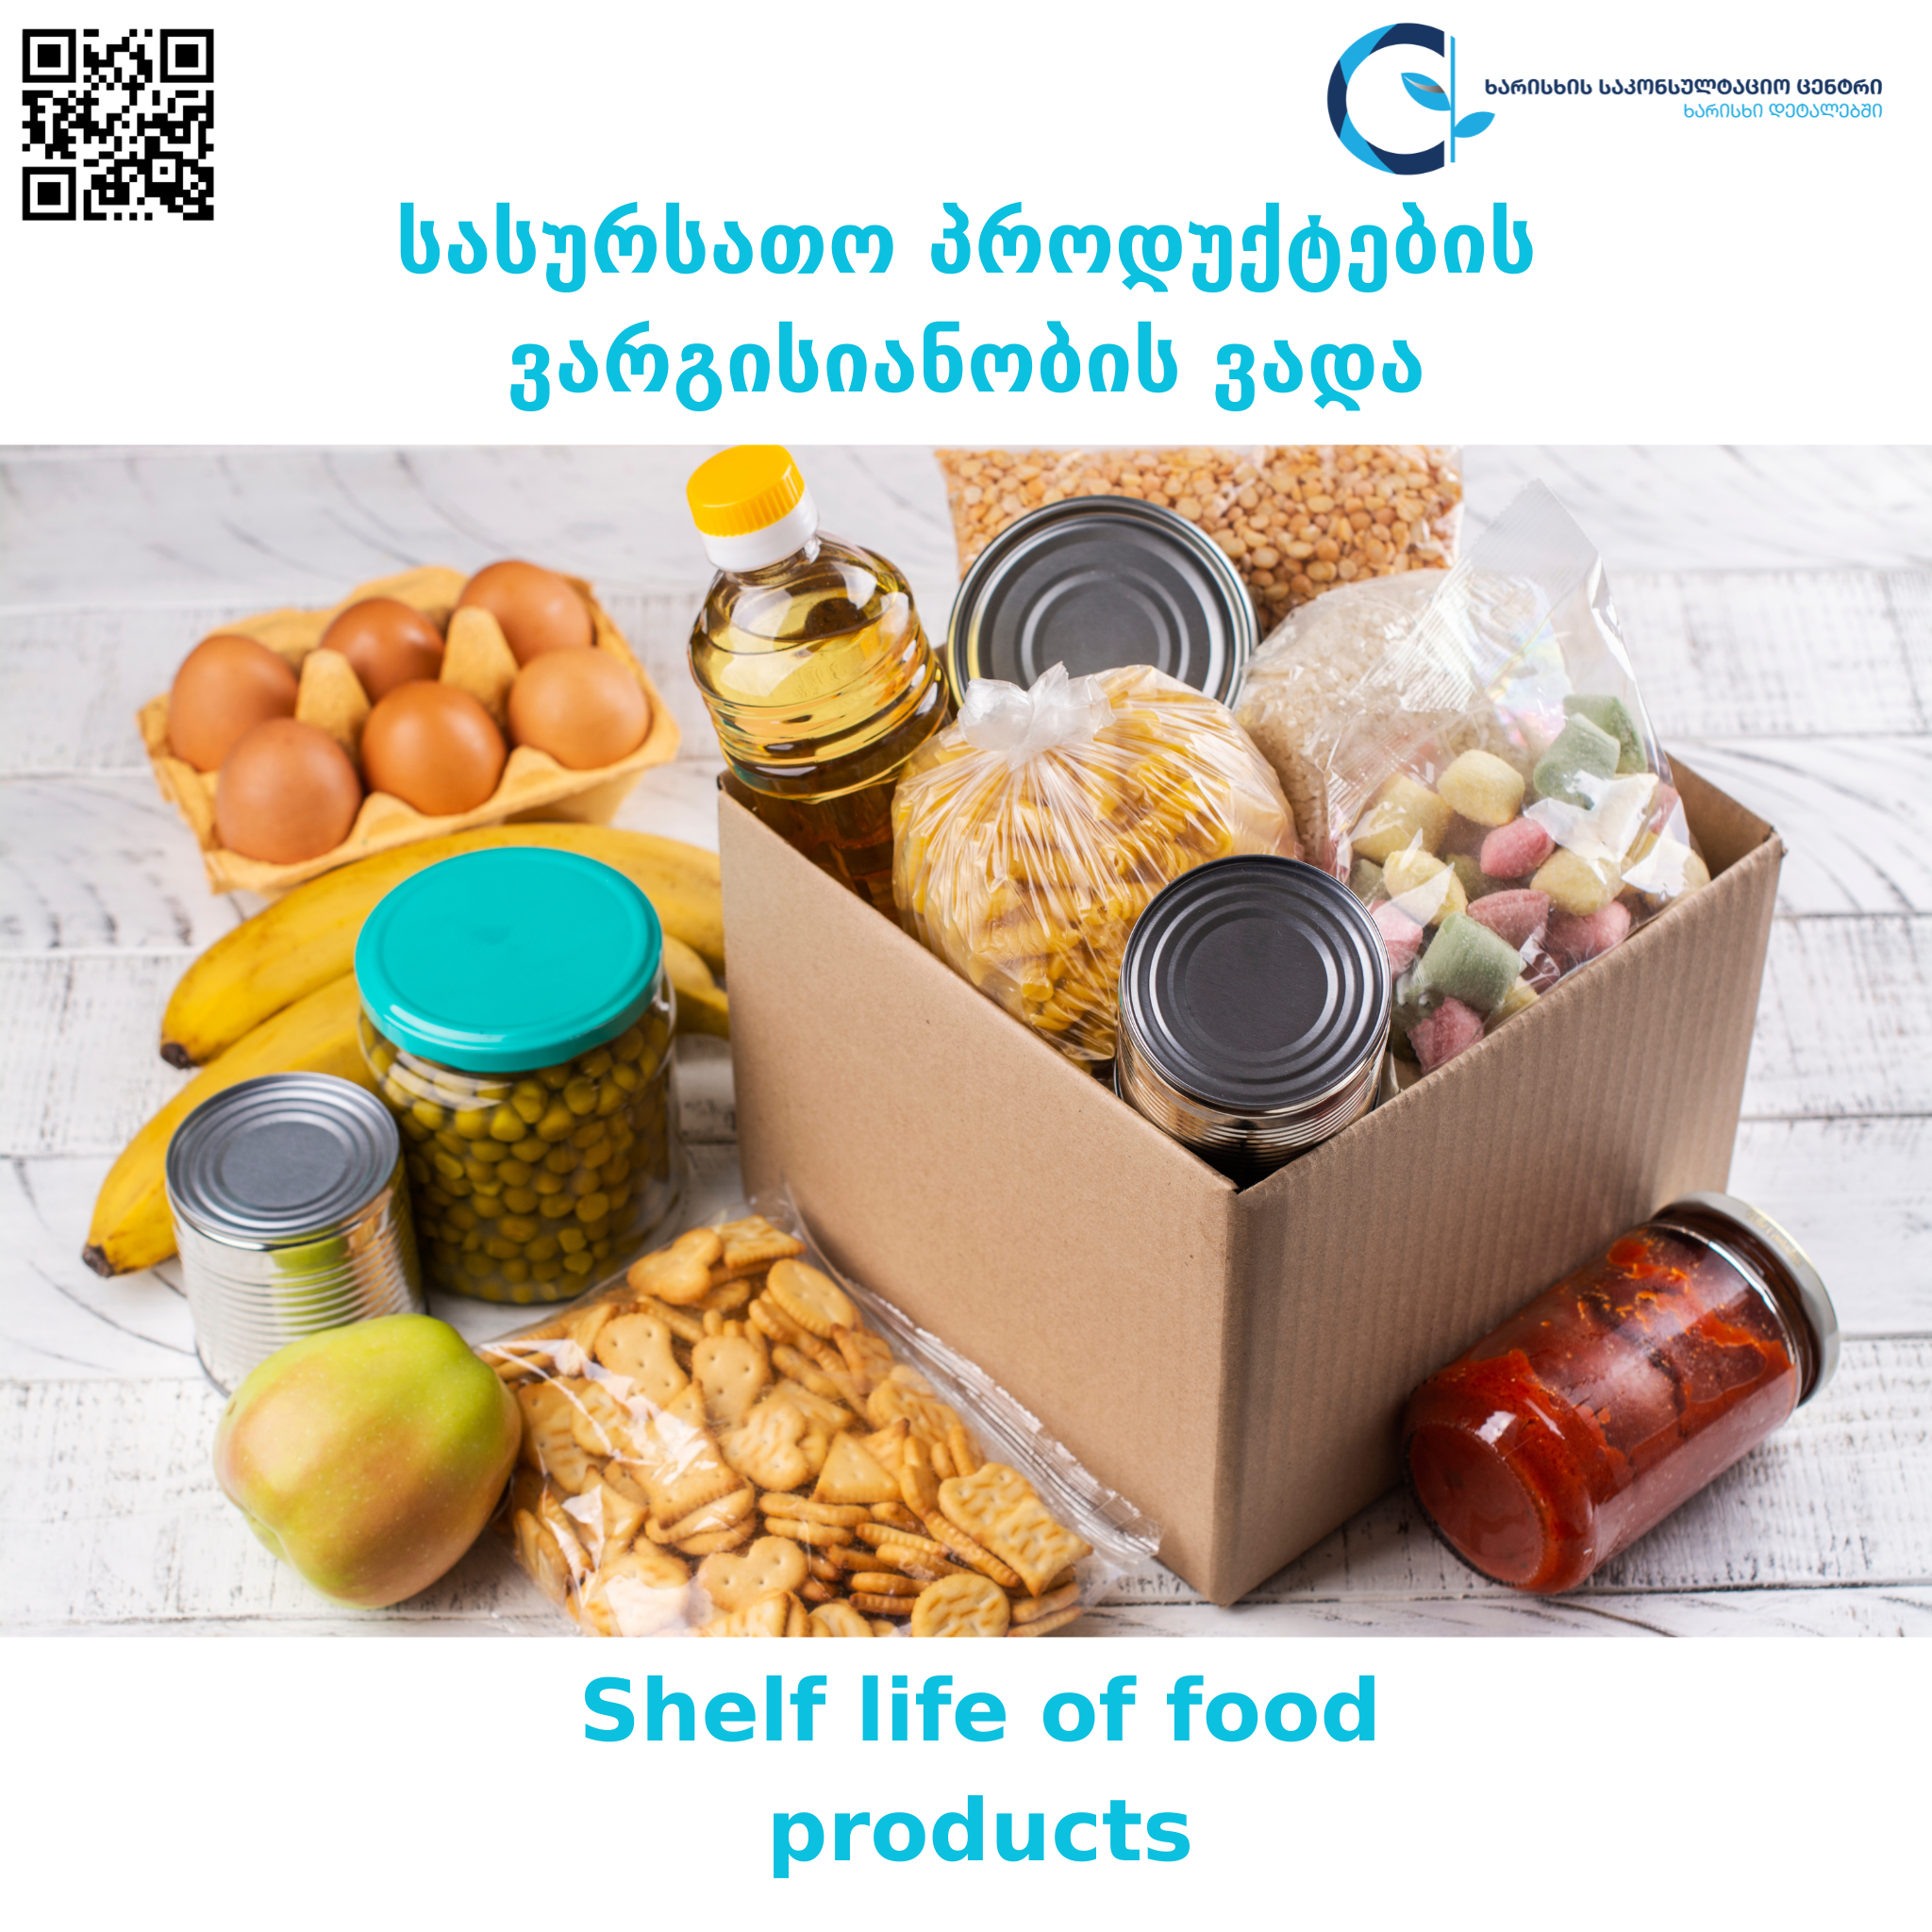 Shelf life of food products